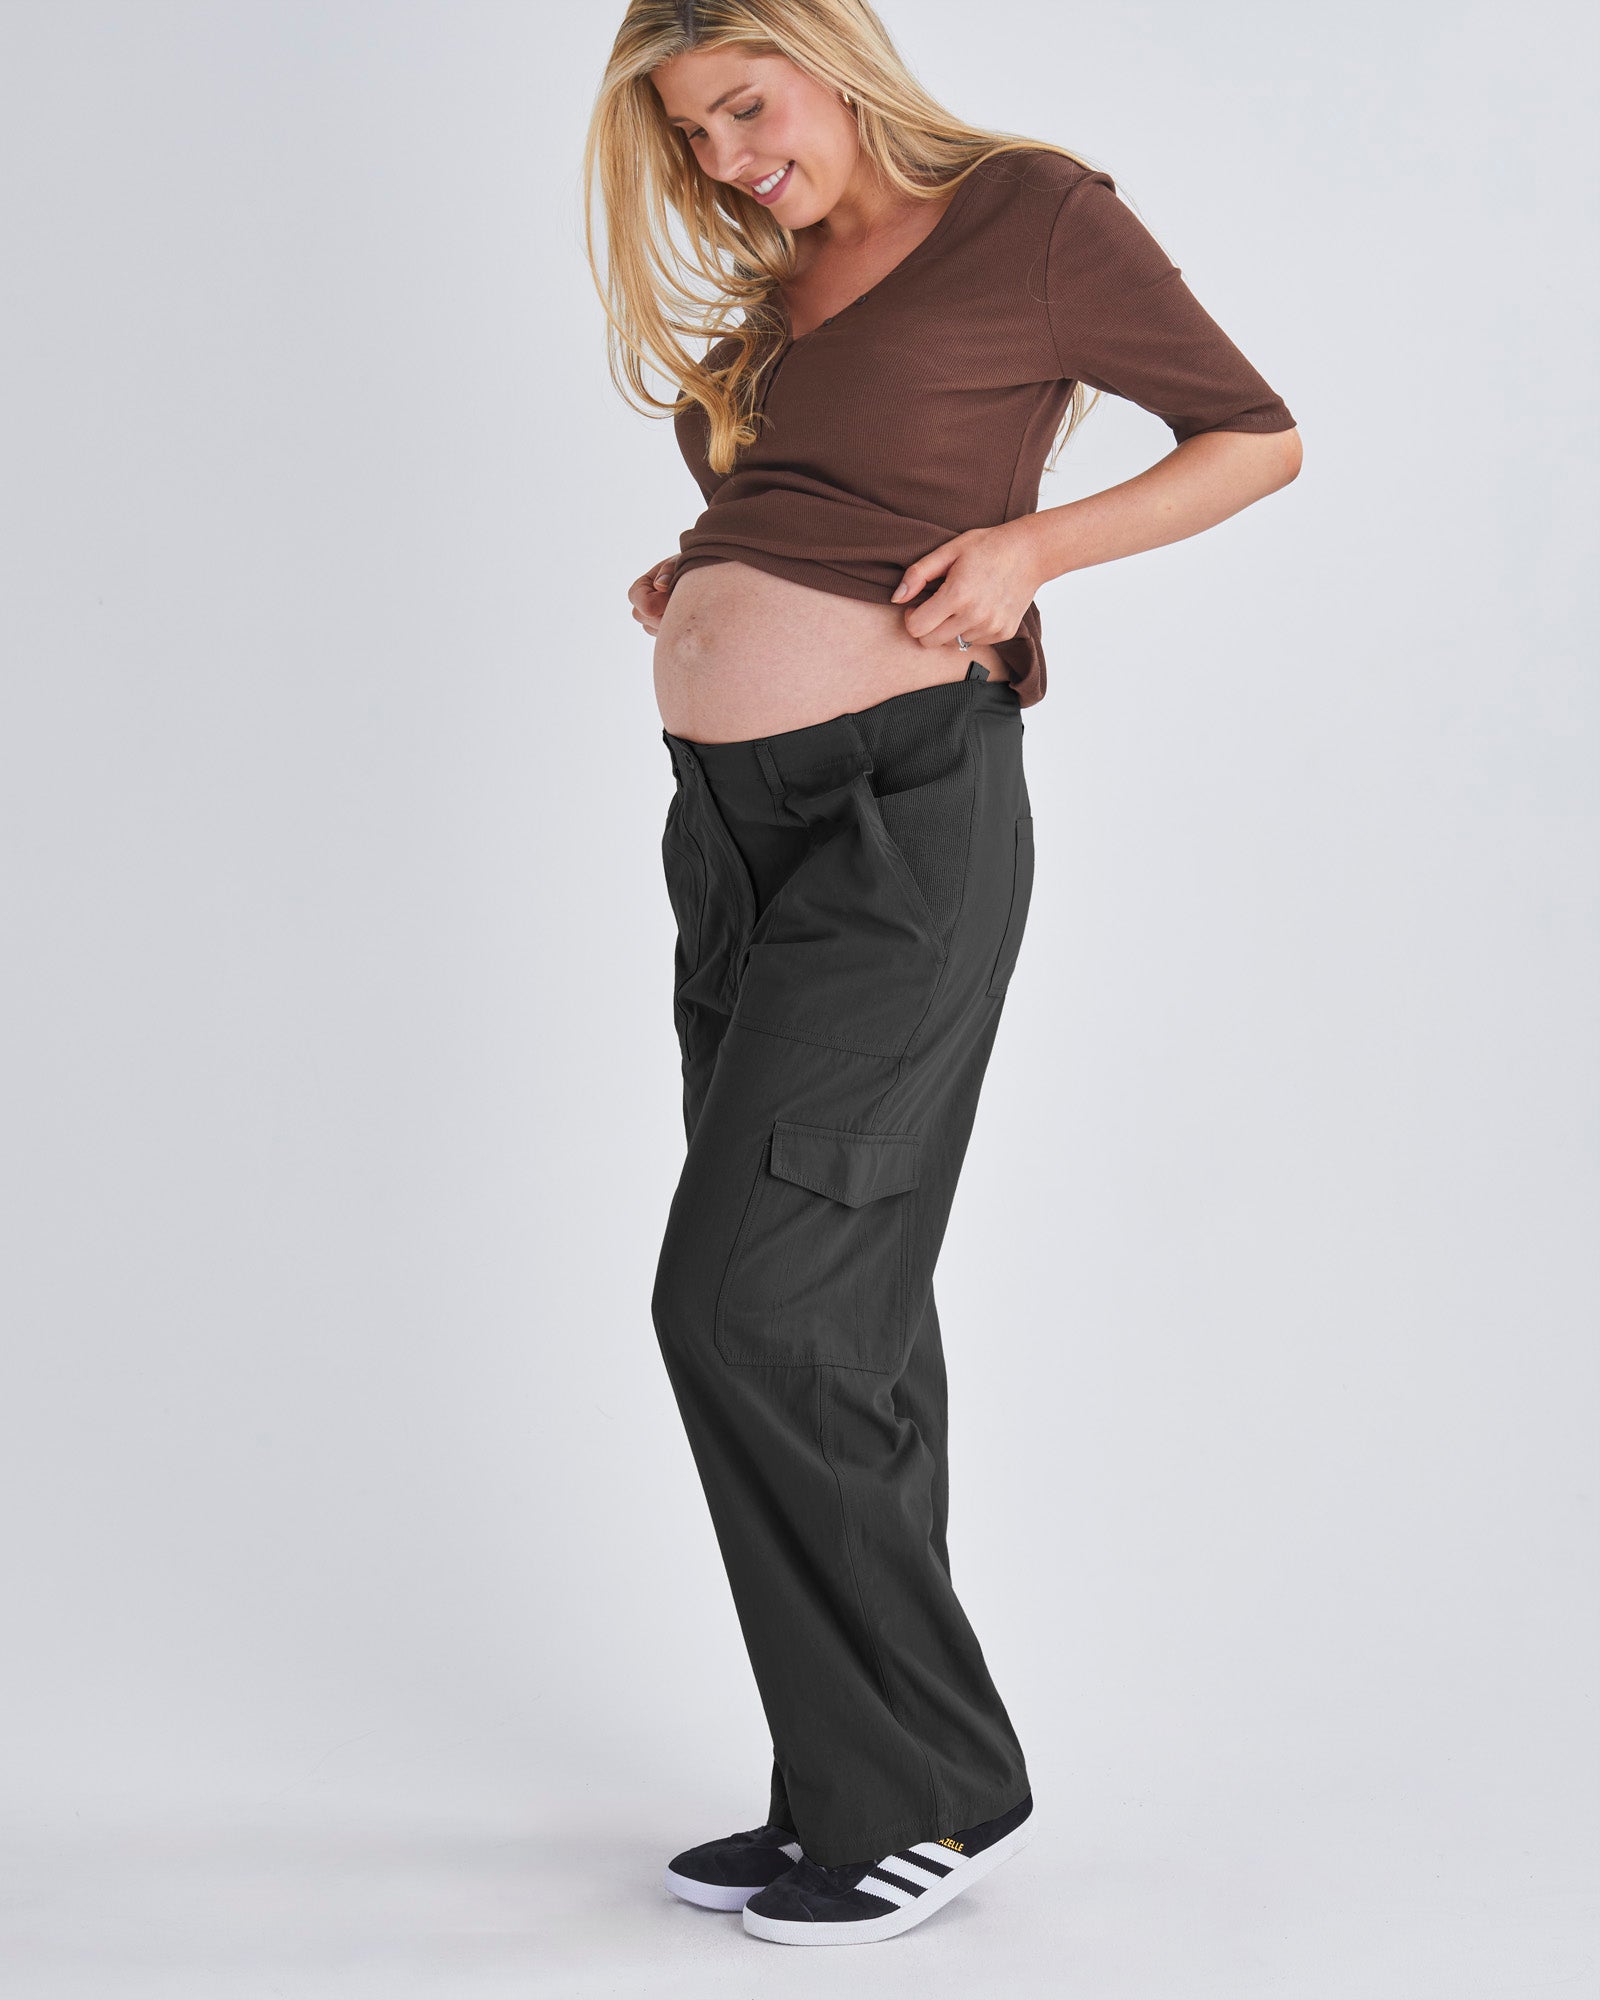 Full View - A Pregnant Woman Wearing Black Maternity Cotton Cargo Pants from Angel Maternity